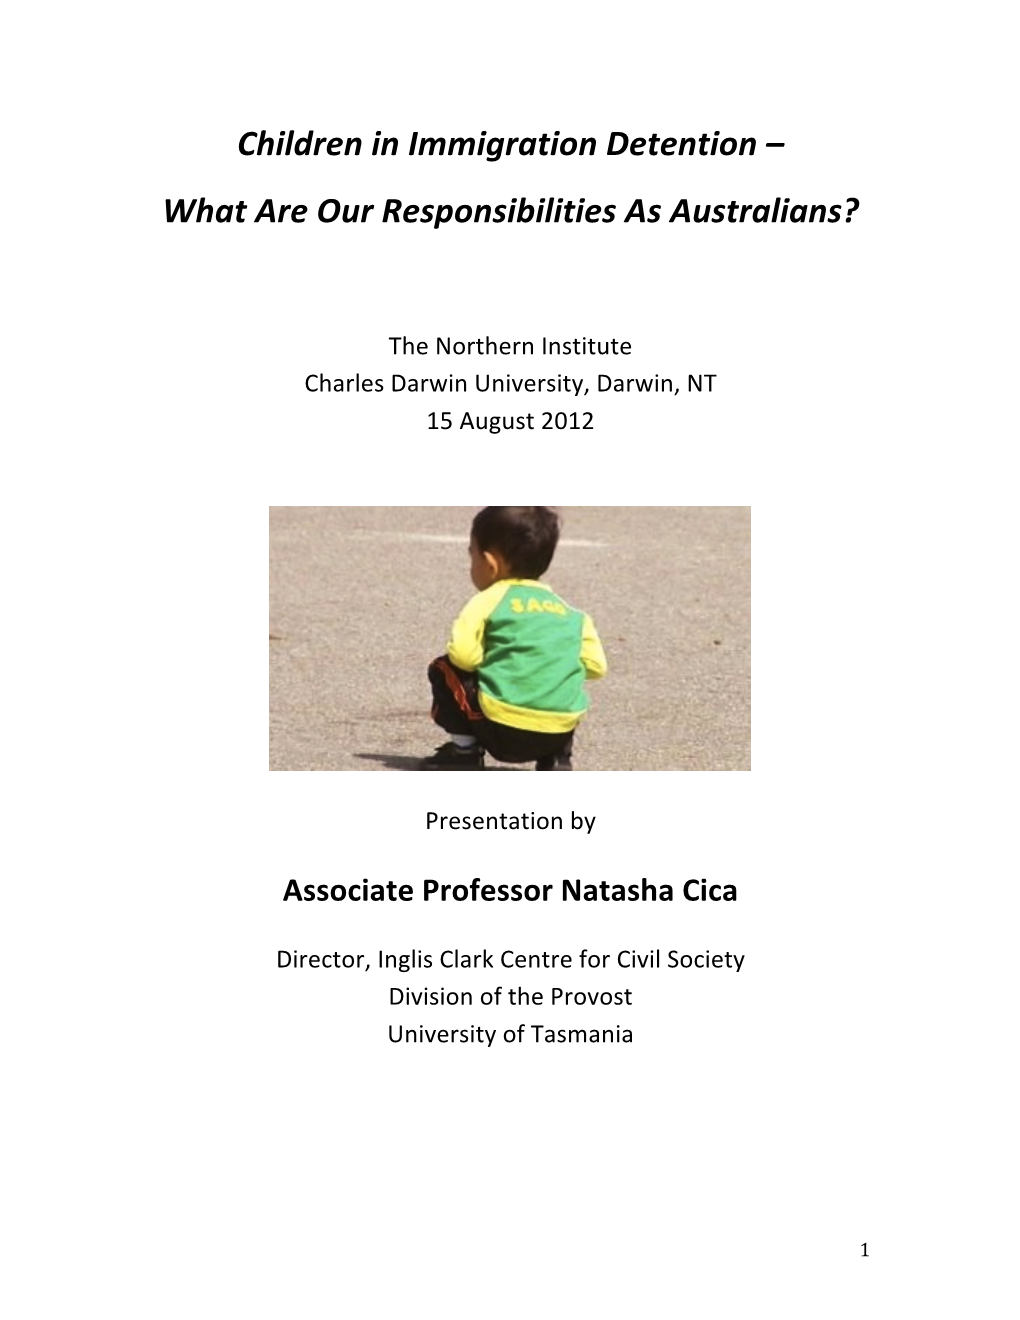 Children in Immigration Detention – What Are Our Responsibilities As Australians?